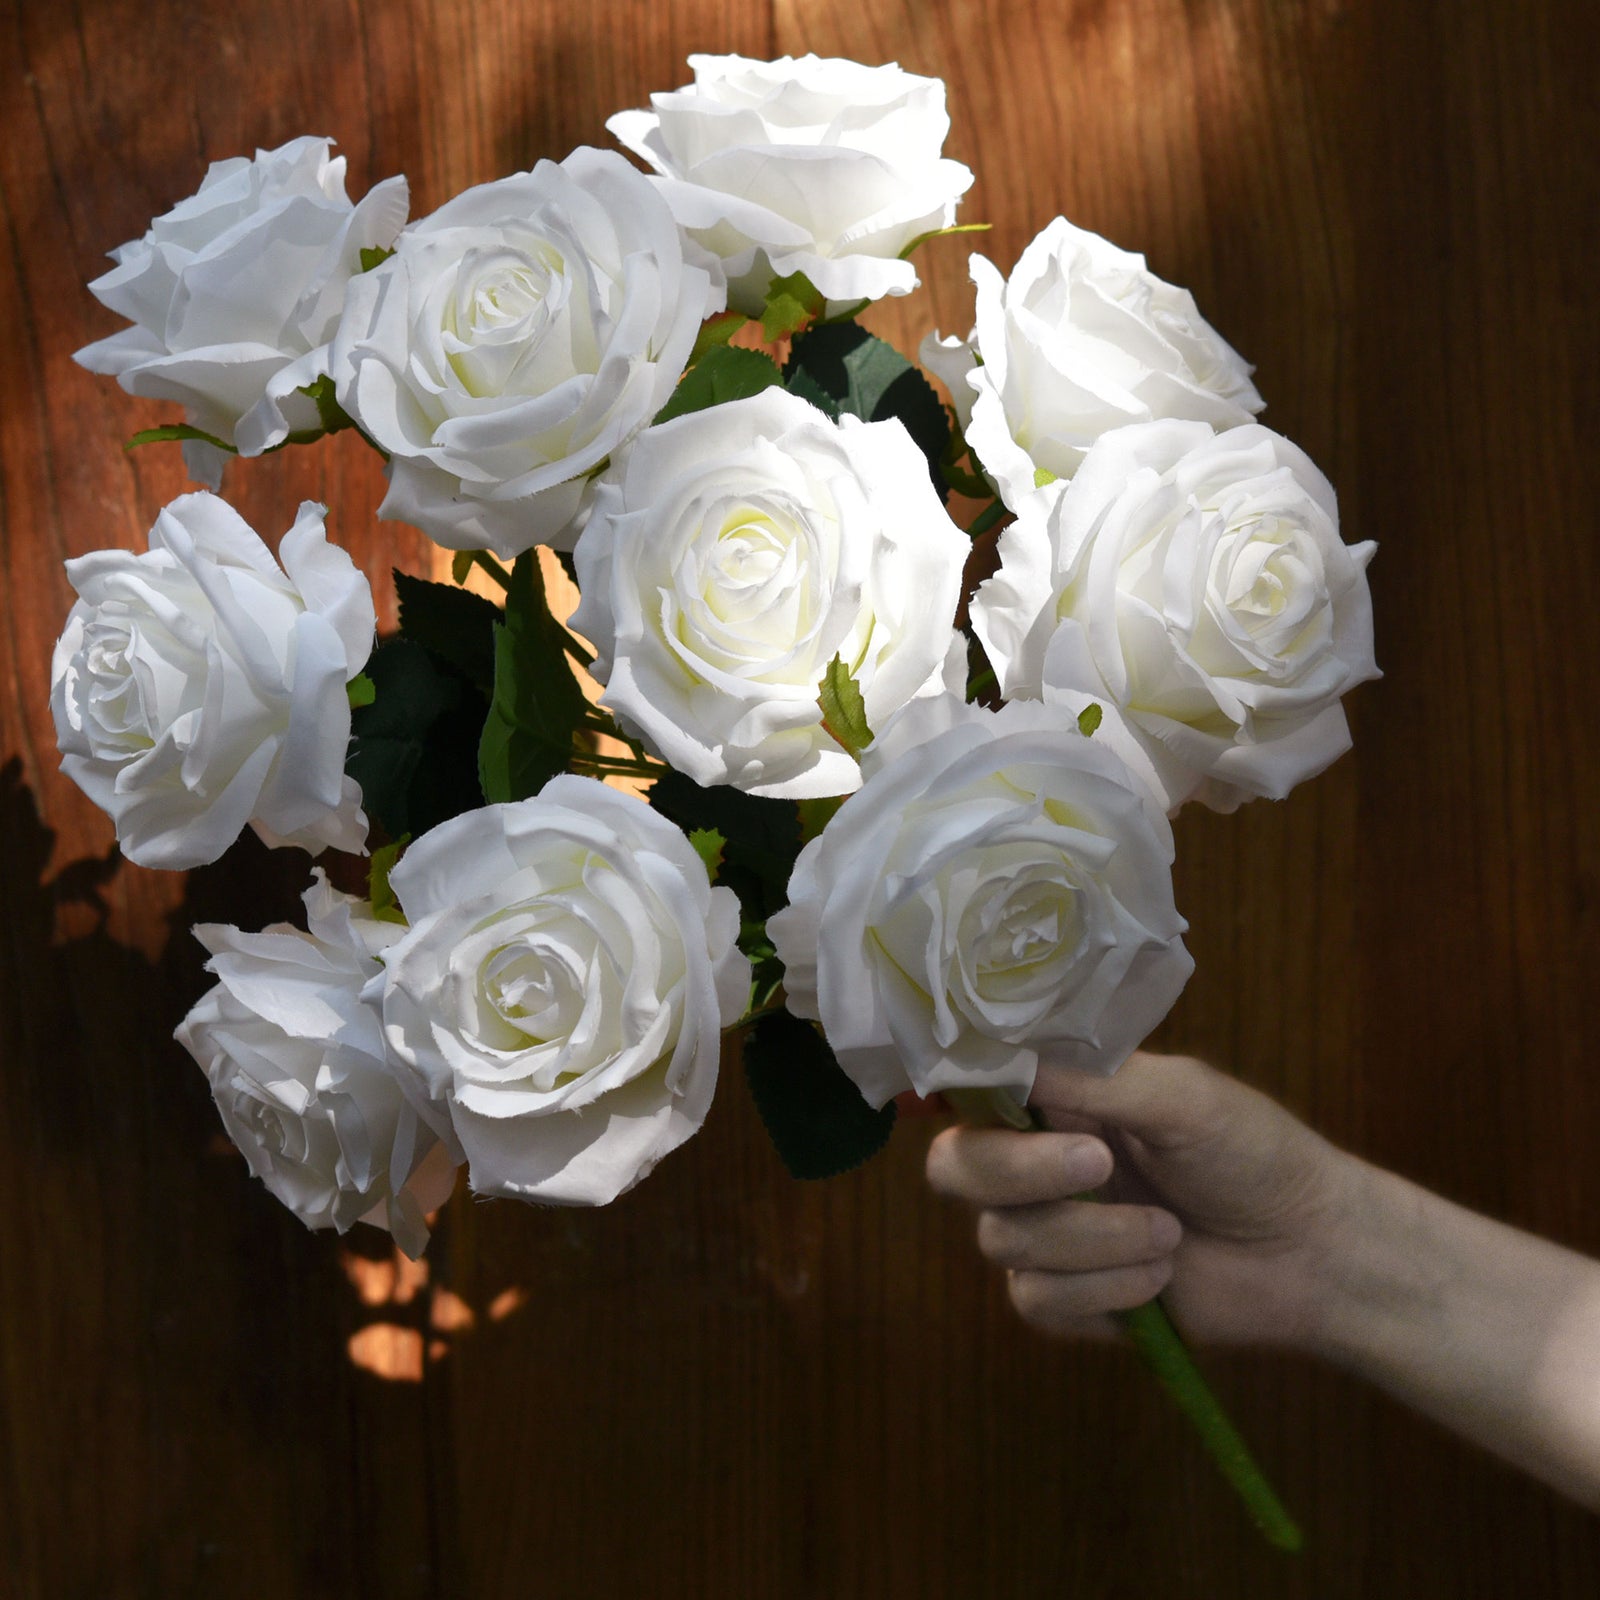 1 Bundle Full Bloom Silk White Roses Artificial Flowers, Home Décor, Wedding, Bridal